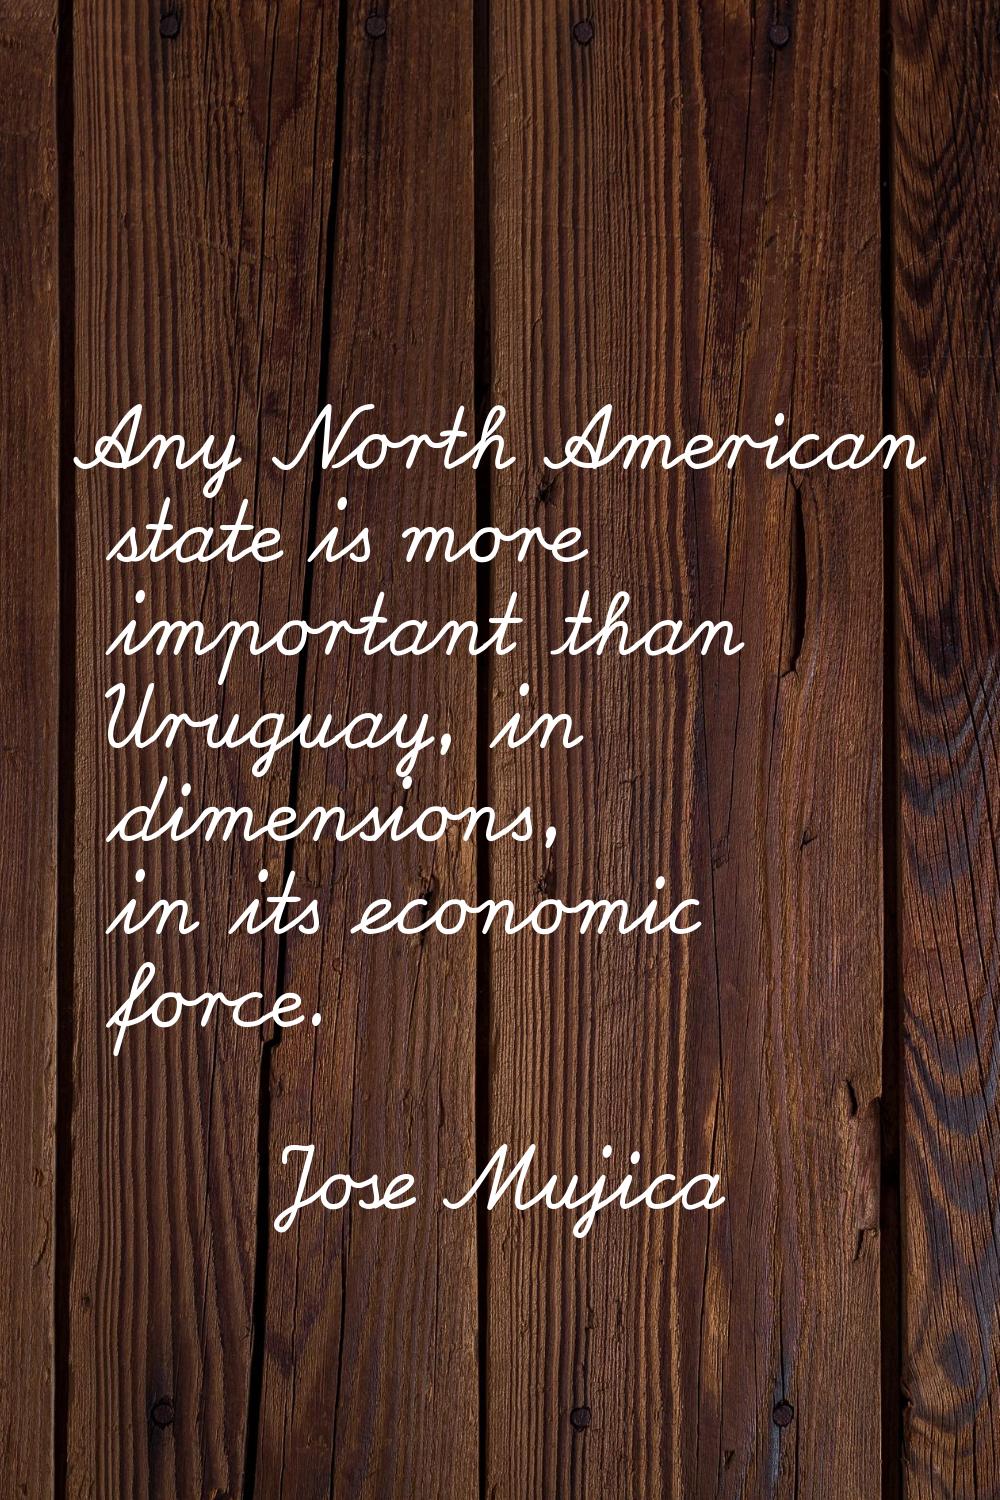 Any North American state is more important than Uruguay, in dimensions, in its economic force.